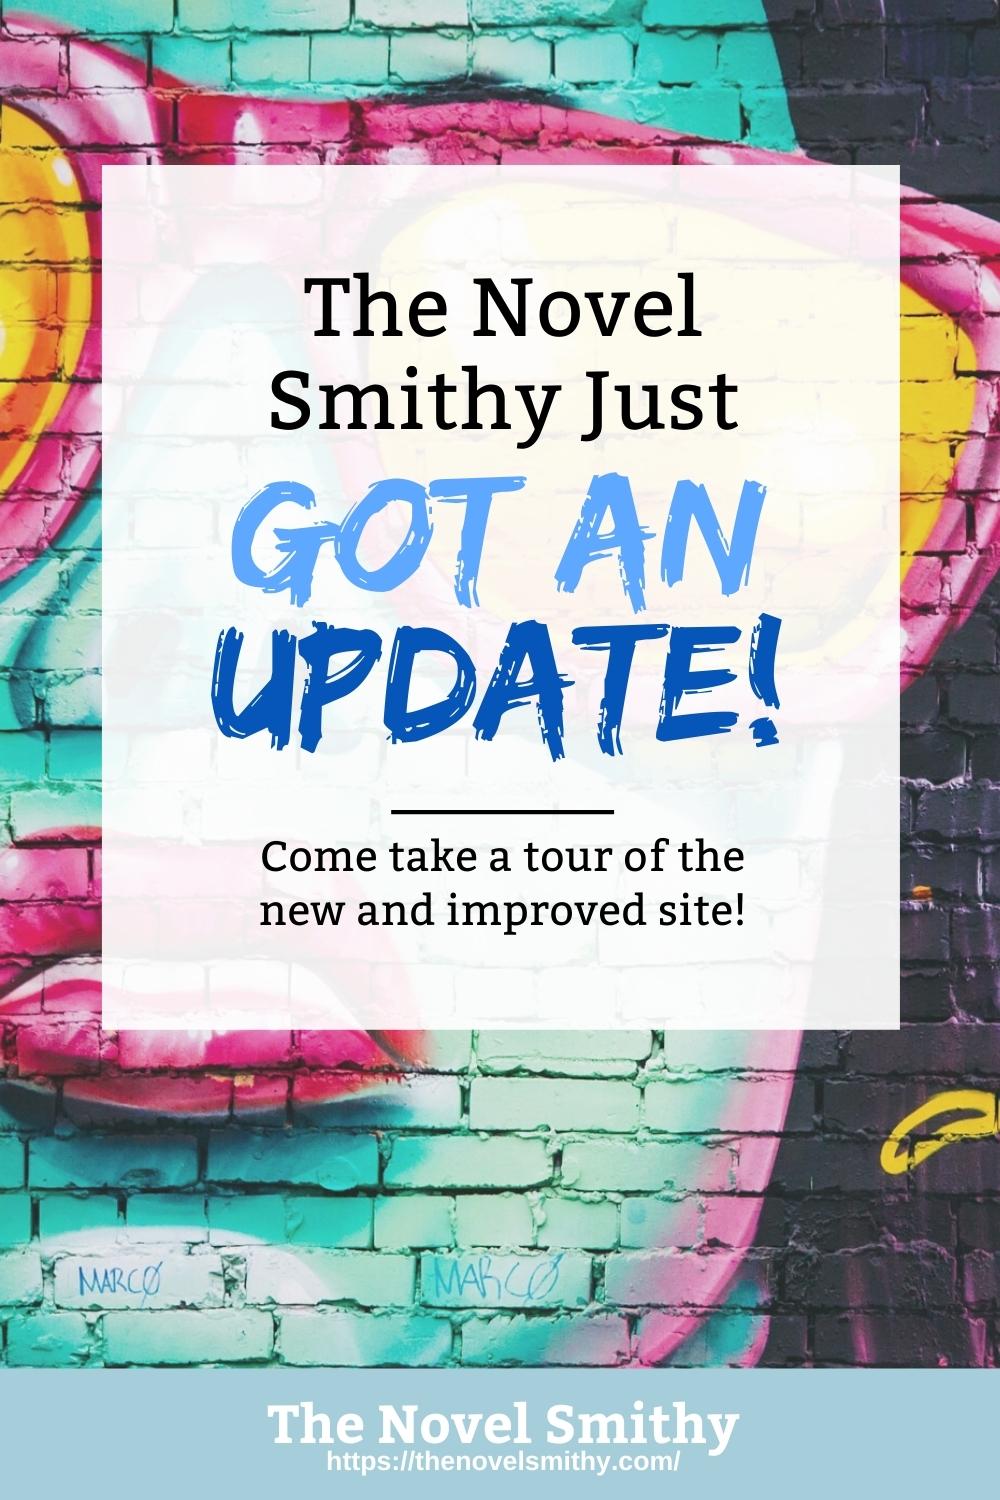 The Novel Smithy Just Got a Redesign!